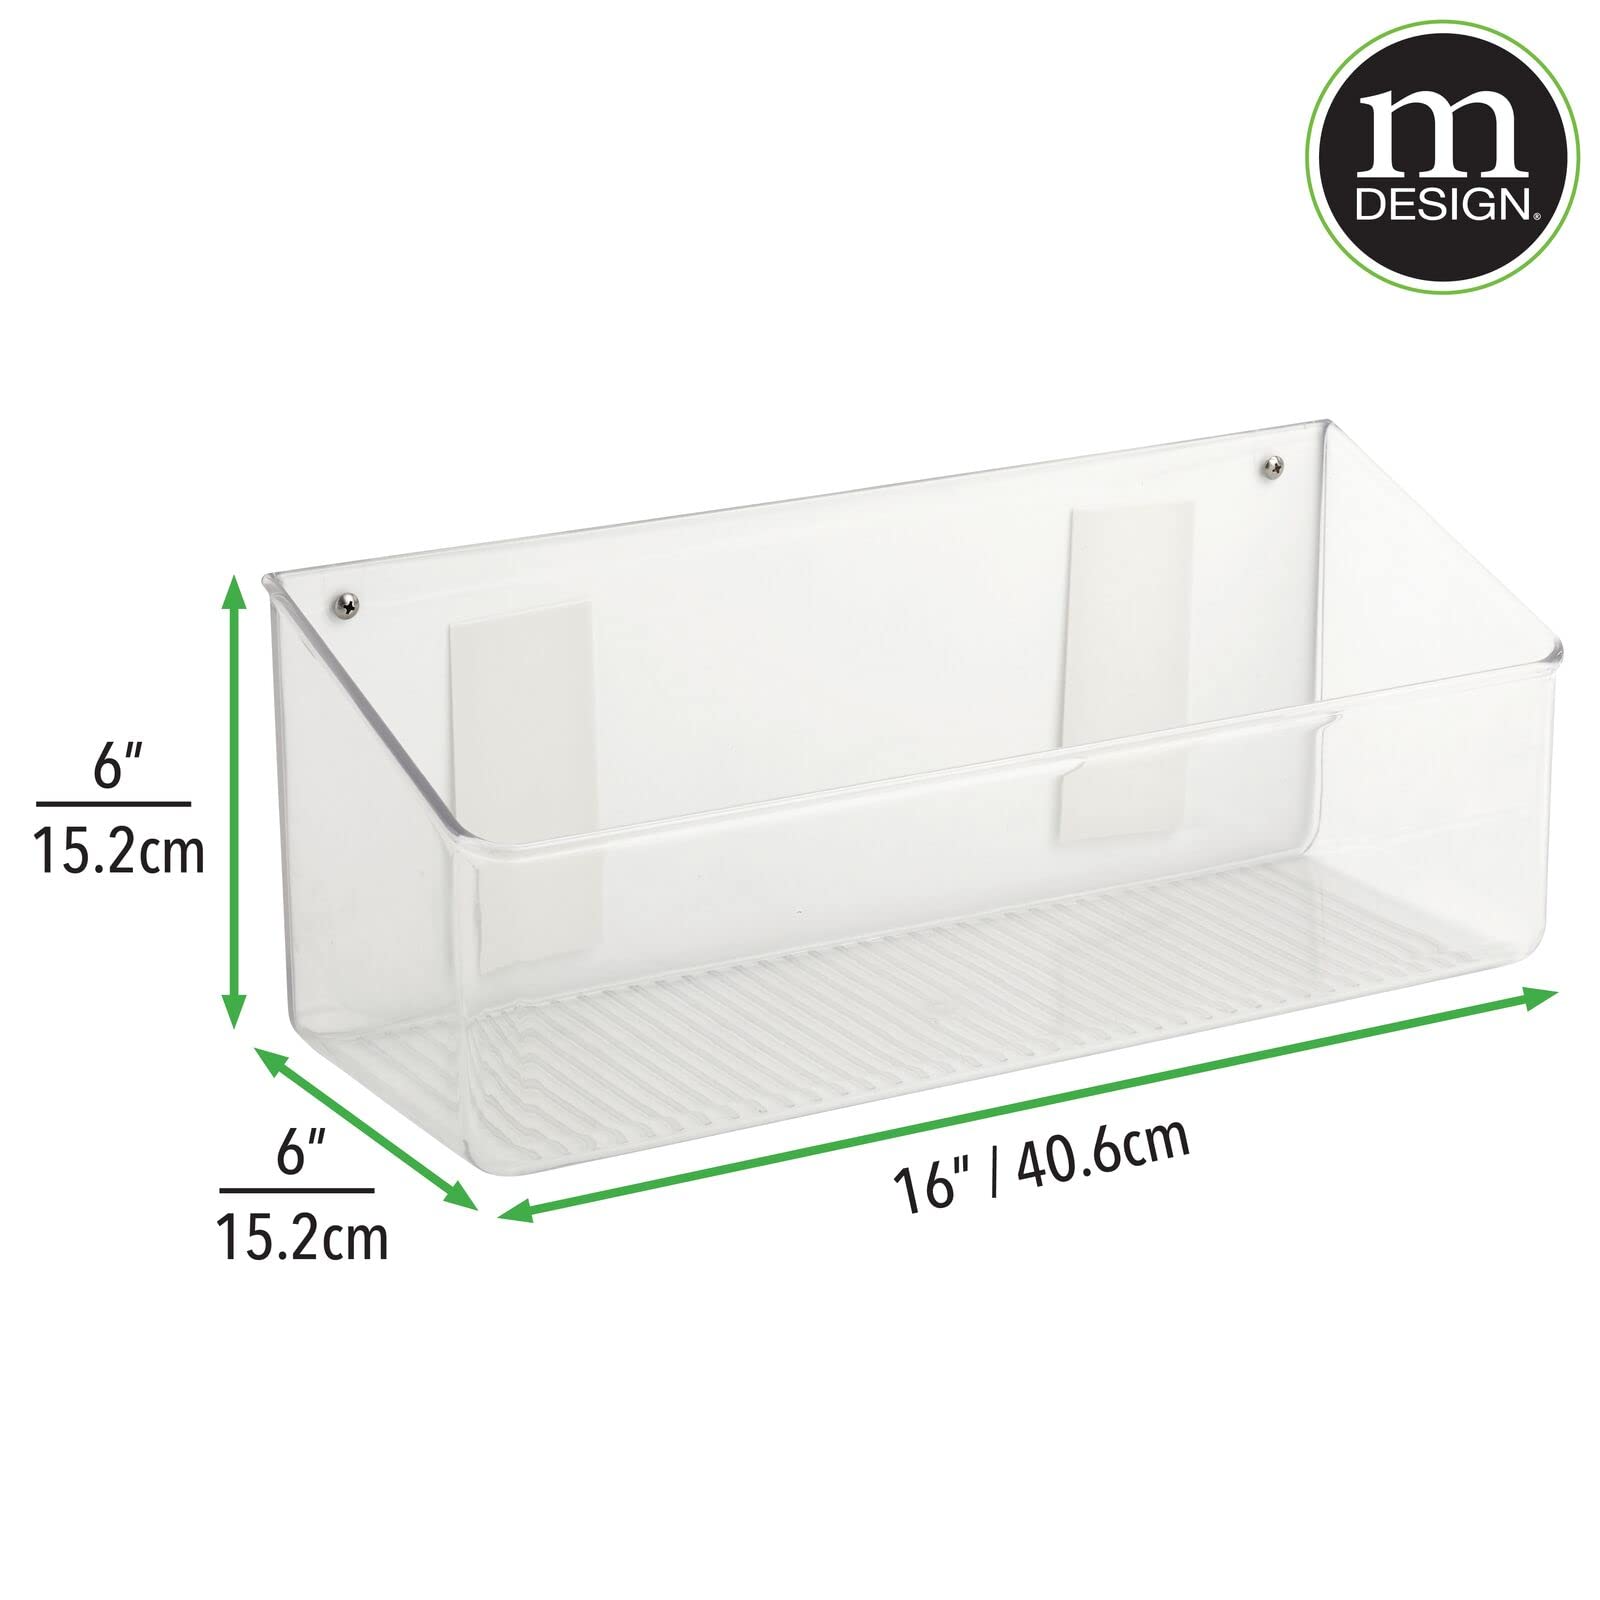 mDesign Wall Mount Plastic Home Storage Organizer Tray Basket with Self-Adhesive Tape - Hanging Bin Shelf for Walls/Doors in Entryway, Mudroom, Bedroom, Bathroom, Office, Laundry, 16" Wide, Clear